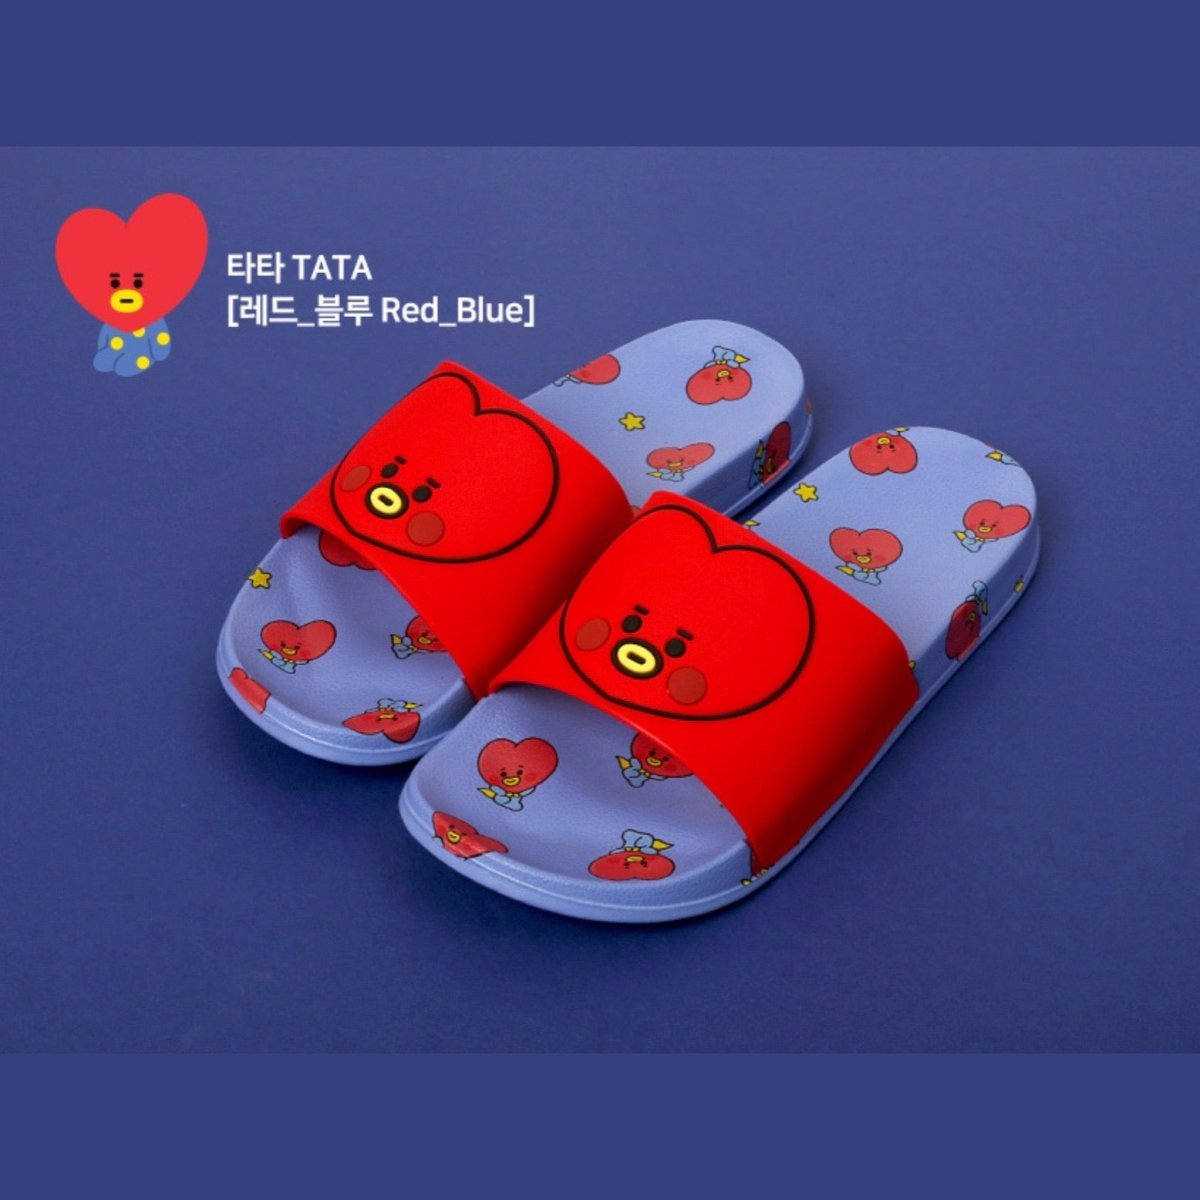 BT21 Character Slippers in RJ Ivory from @linefriendsofficial